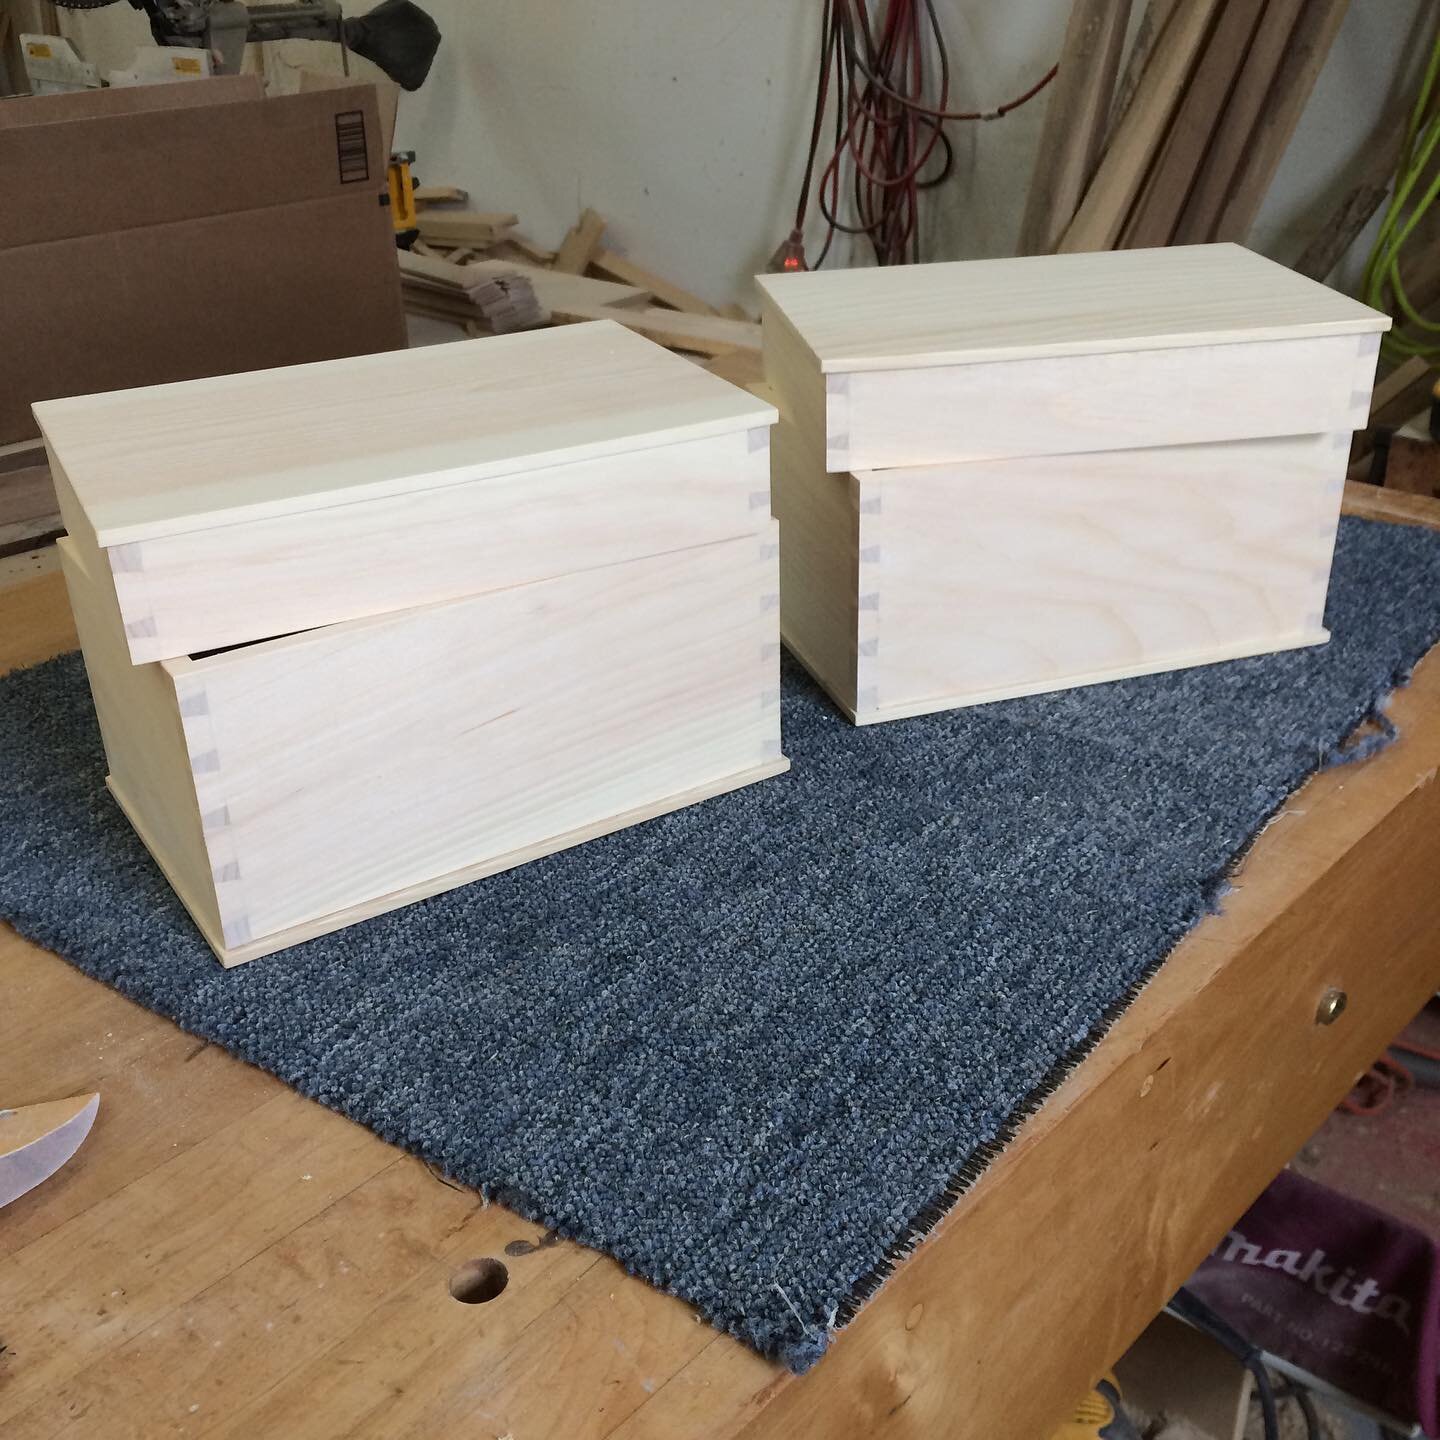 Working on these pine dovetailed boxes that will eventually be used as cremation urns. They are for a couple in Vermont so I chuckled when I realized I was listening to @graciepotter , also from VT. Stopped me up when I realized the song, about a wom